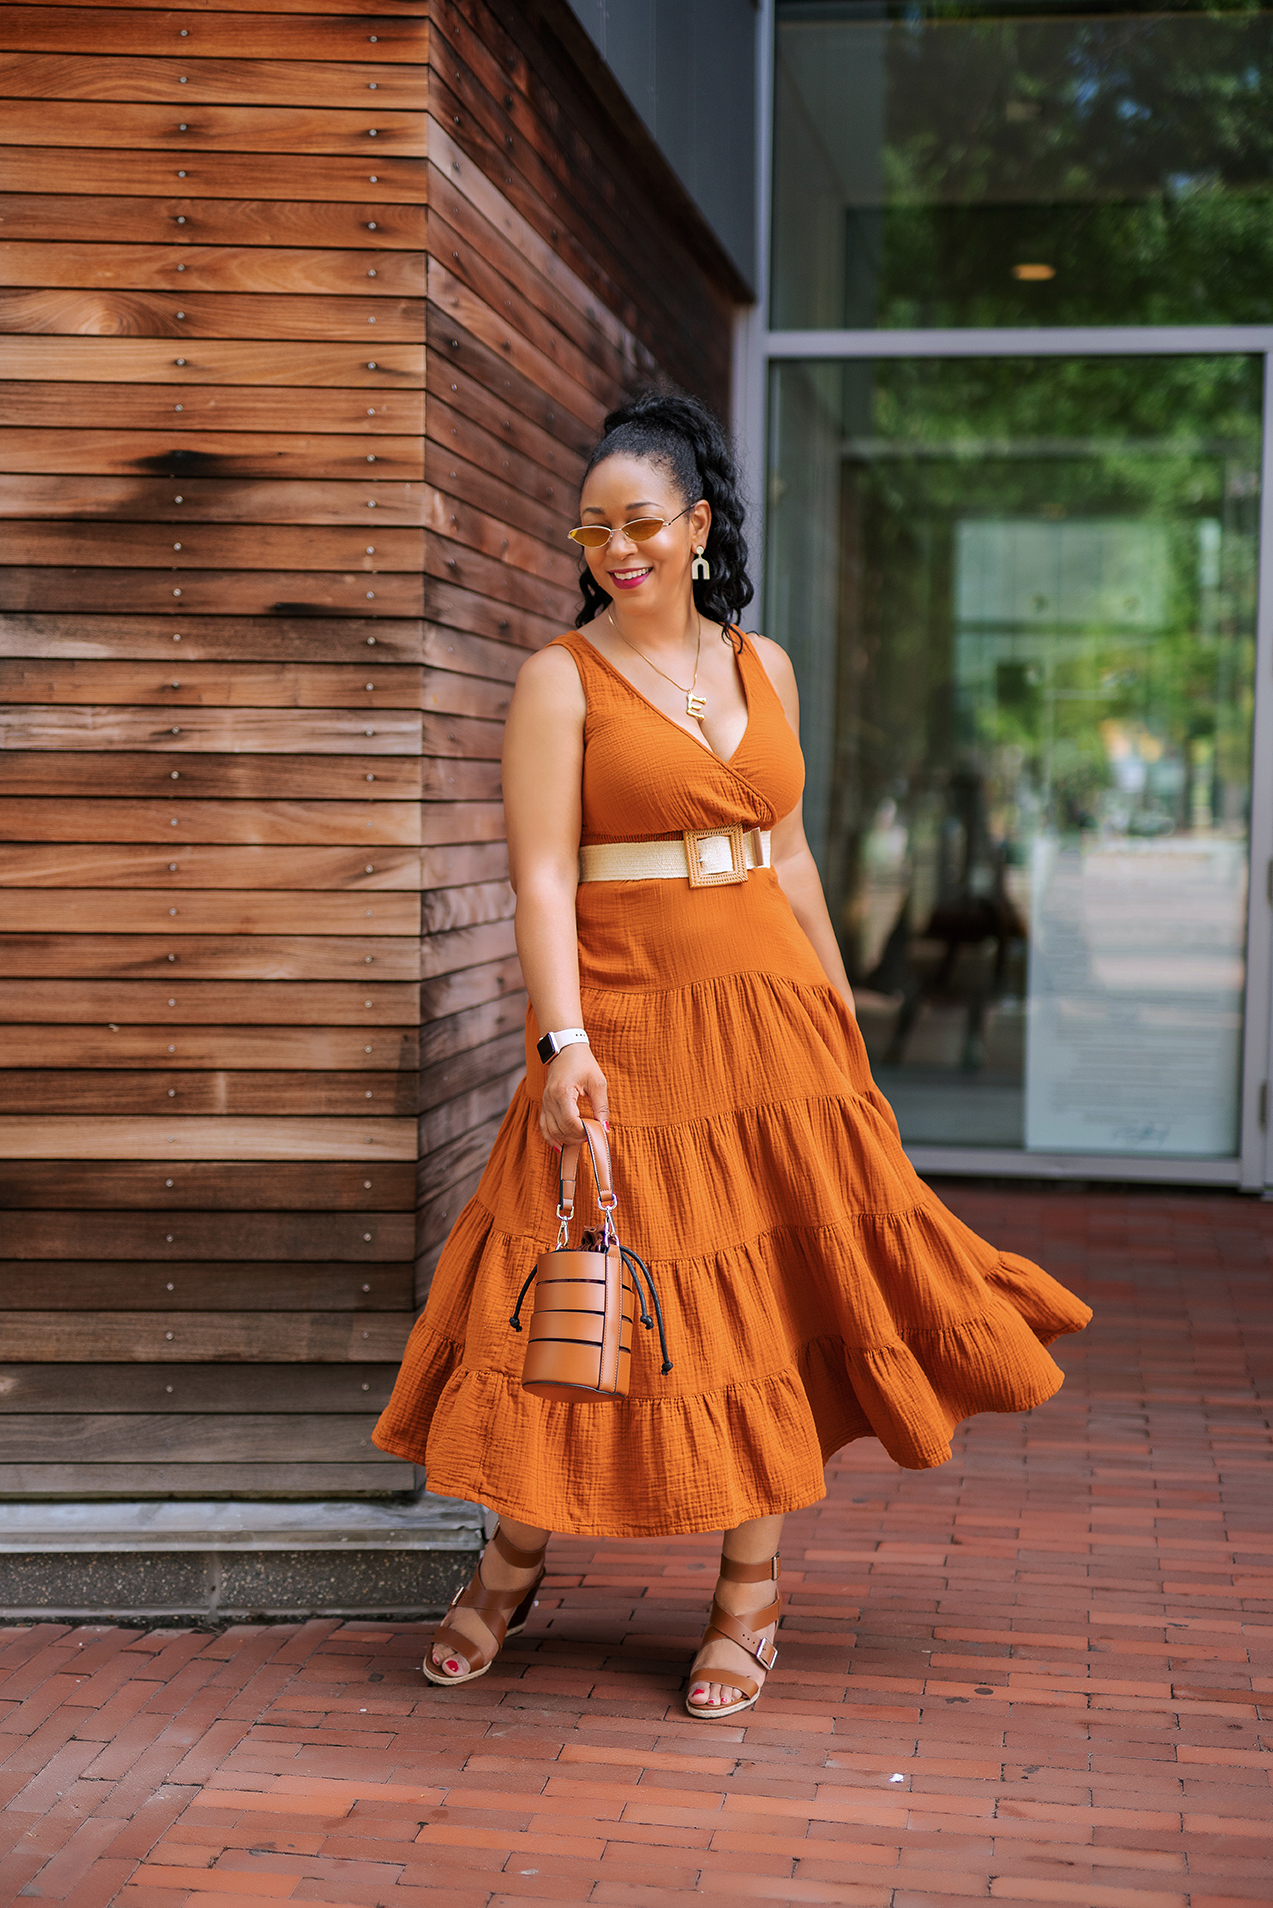 Pumpkin Spice and Everything Nice: What I'm Wearing: Women's Cateye Sunglasses - Wild Fable™ Gold, Women's Sleeveless Tiered Dress - Universal Thread™, Woven Elastic Stretch Waist Band Wood Buckle Belt, Eva Mendes Collection Cutout Bucket Bag, Essex Lane Finnet Wedge Sandal